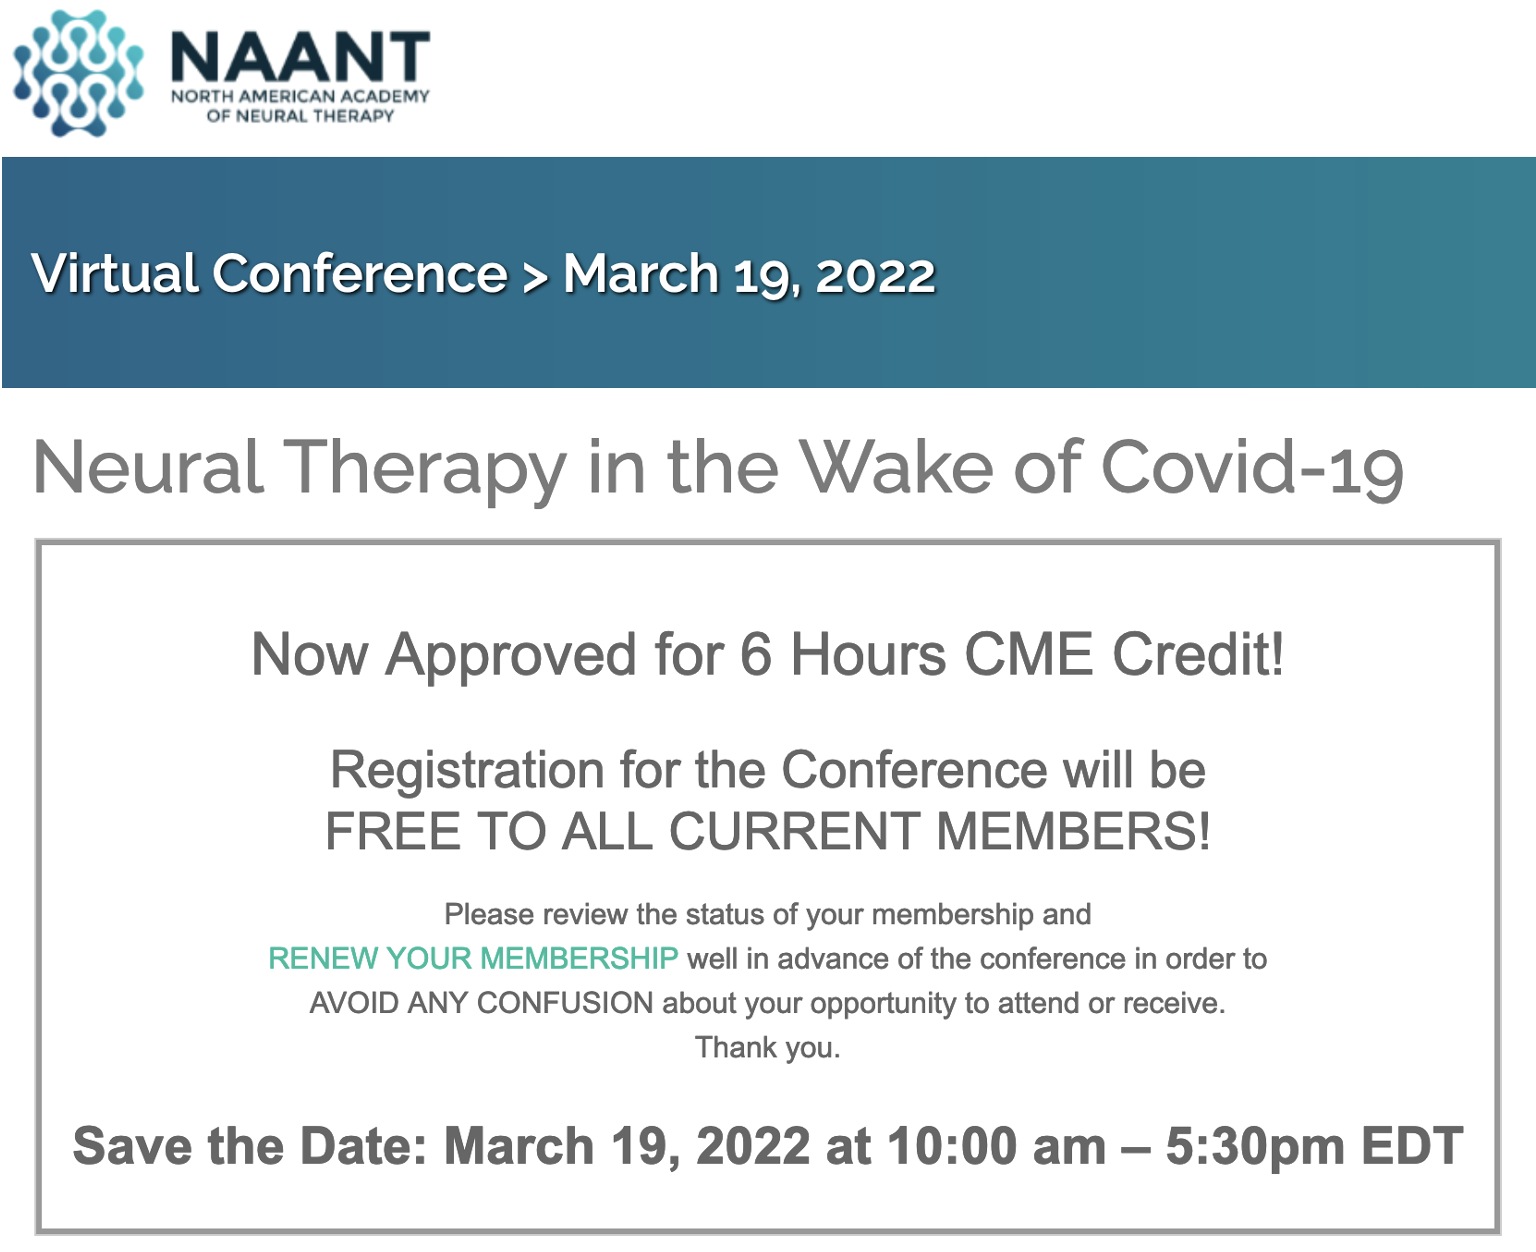 NAANT 2022 COVID CONFERENCE